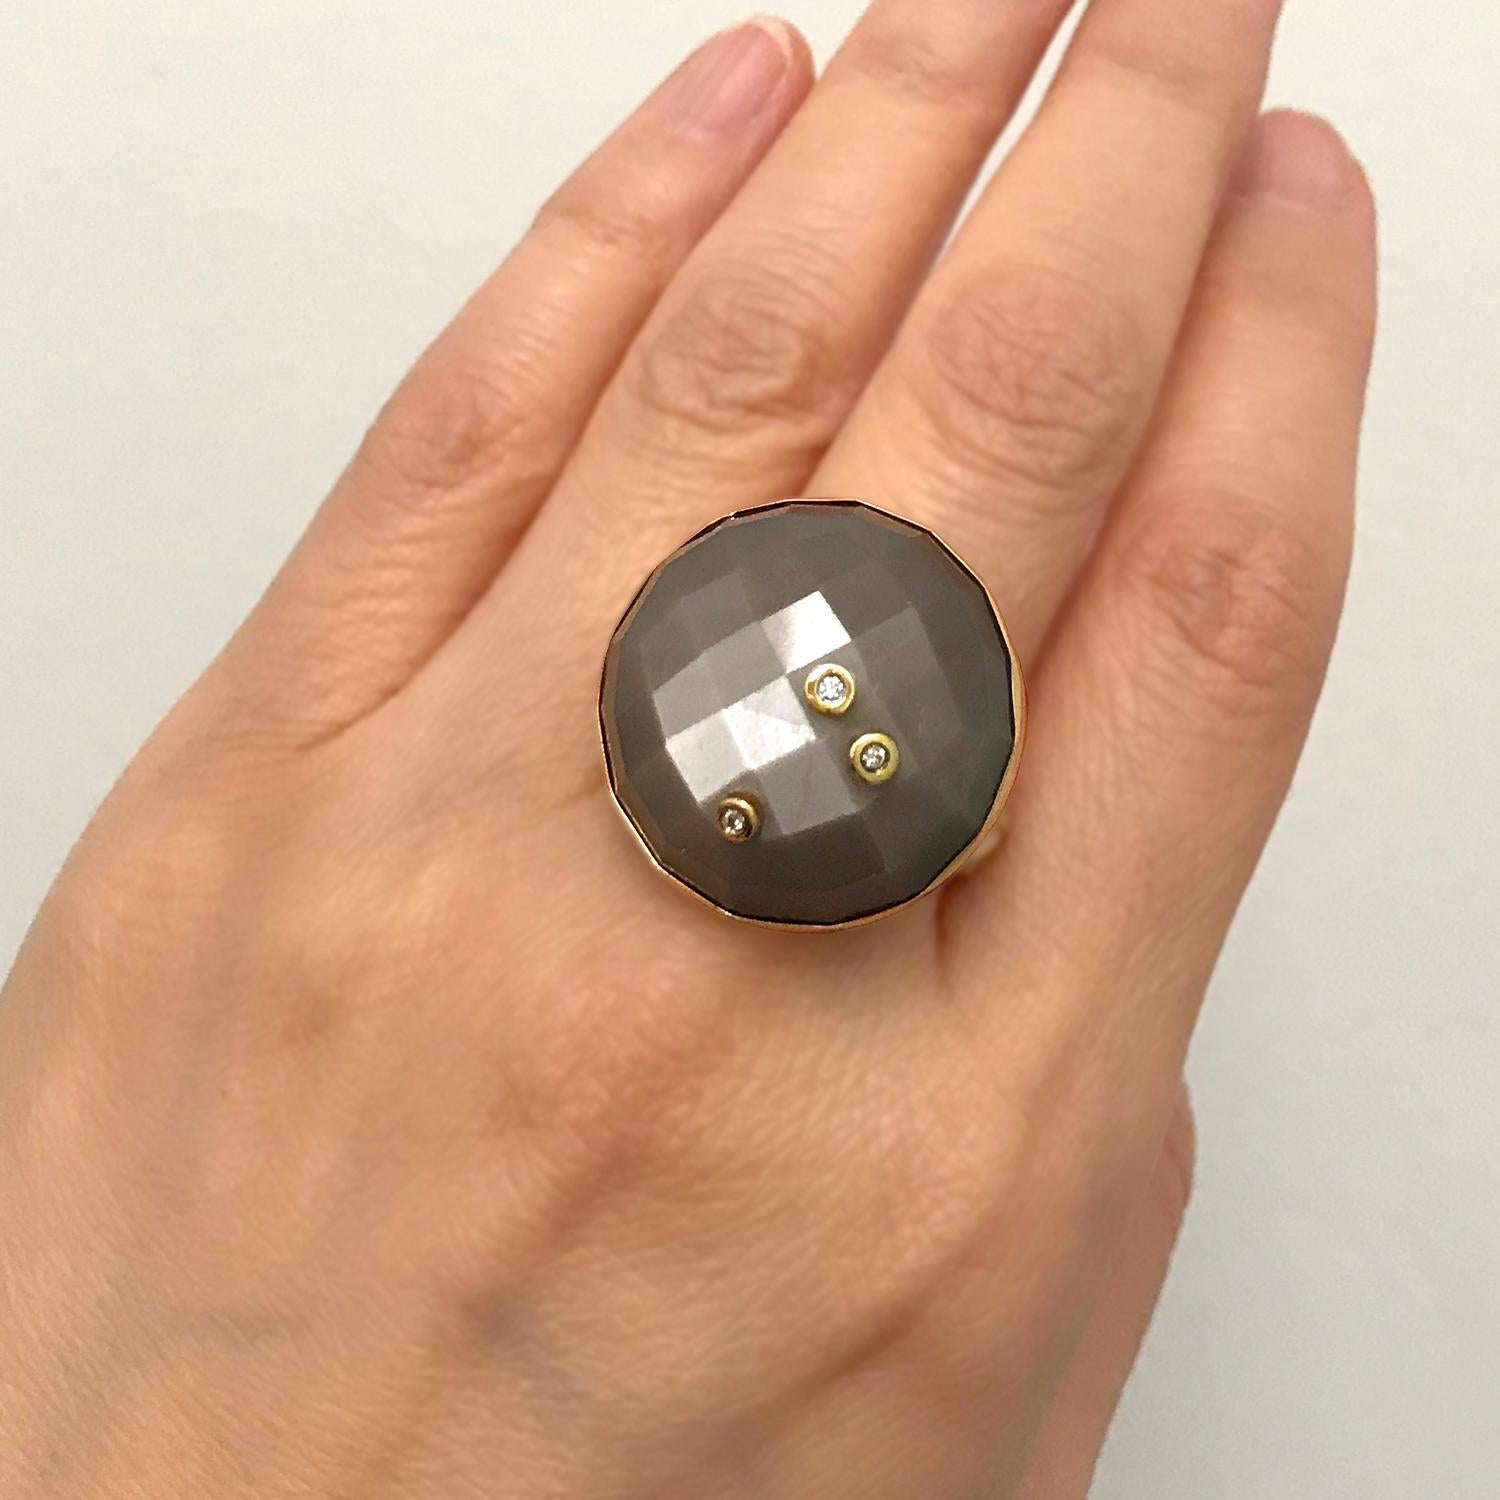 The contemporary Starry Moon Ring is handmade by K.Mita from 18 Karat Yellow Gold and Sterling Silver. It features a large 49.1 Carat faceted Chocolate Moonstone that is 24mm across at its widest point. Three diamonds (total weight 0.028 Carats) are